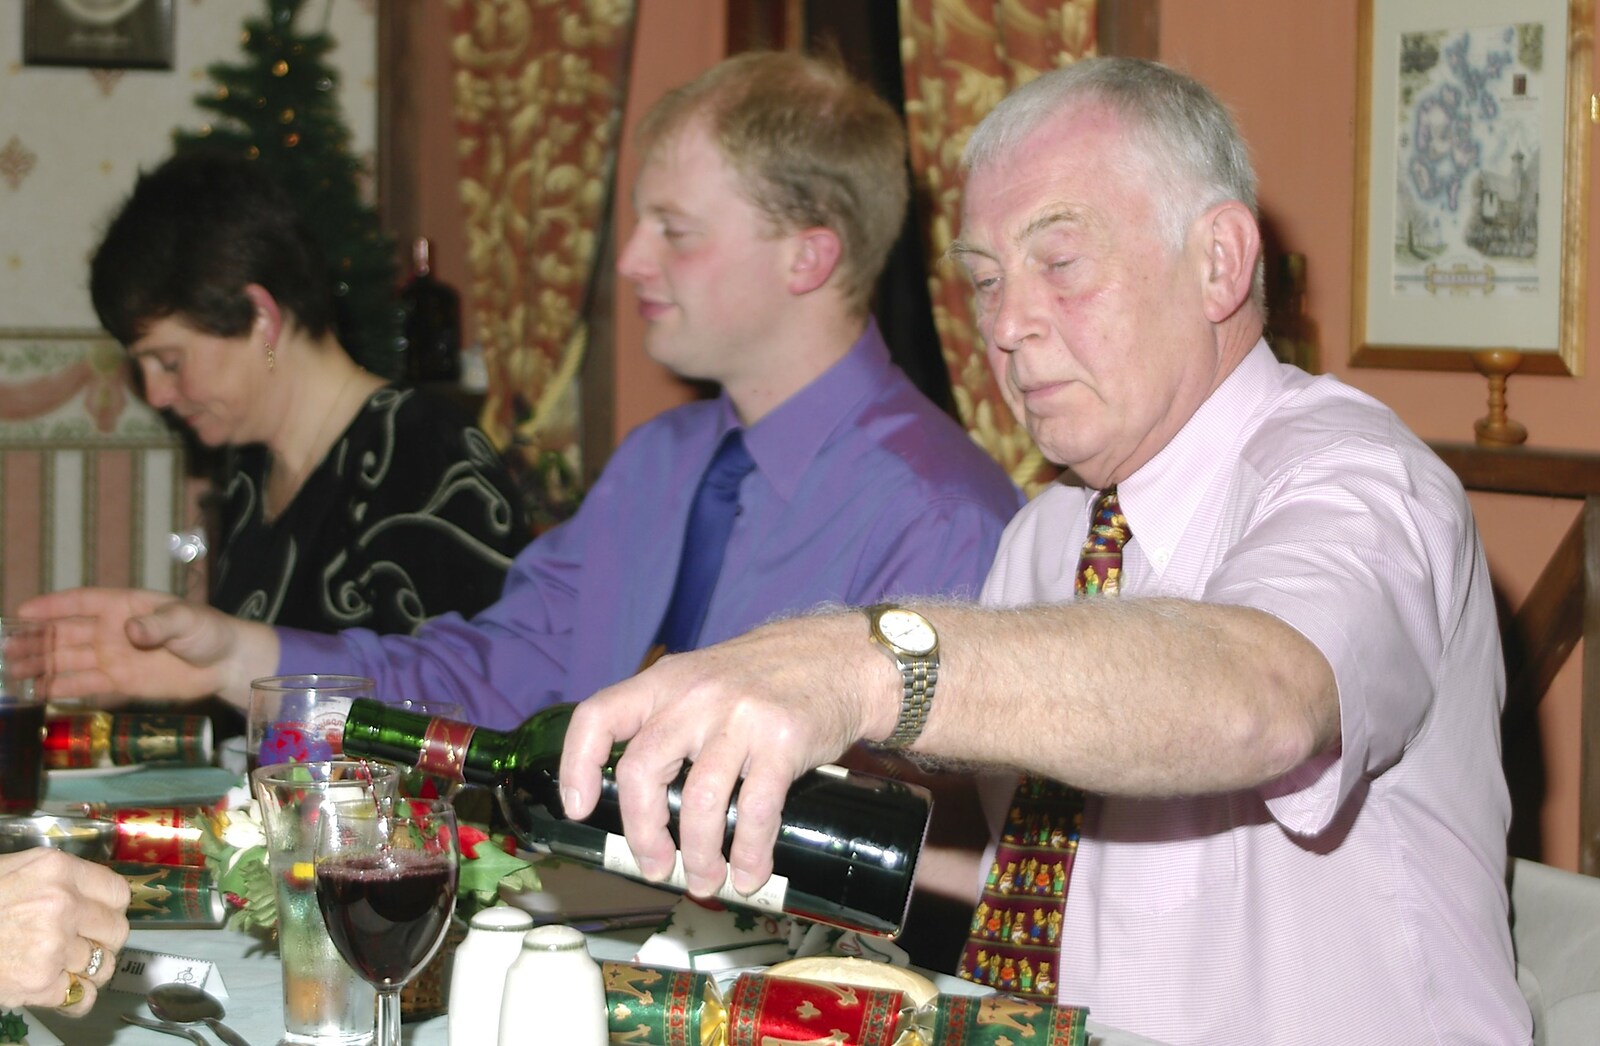 The BSCC Annual Dinner, The Brome Swan, Suffolk - 4th December 2004: Colin pours some wine